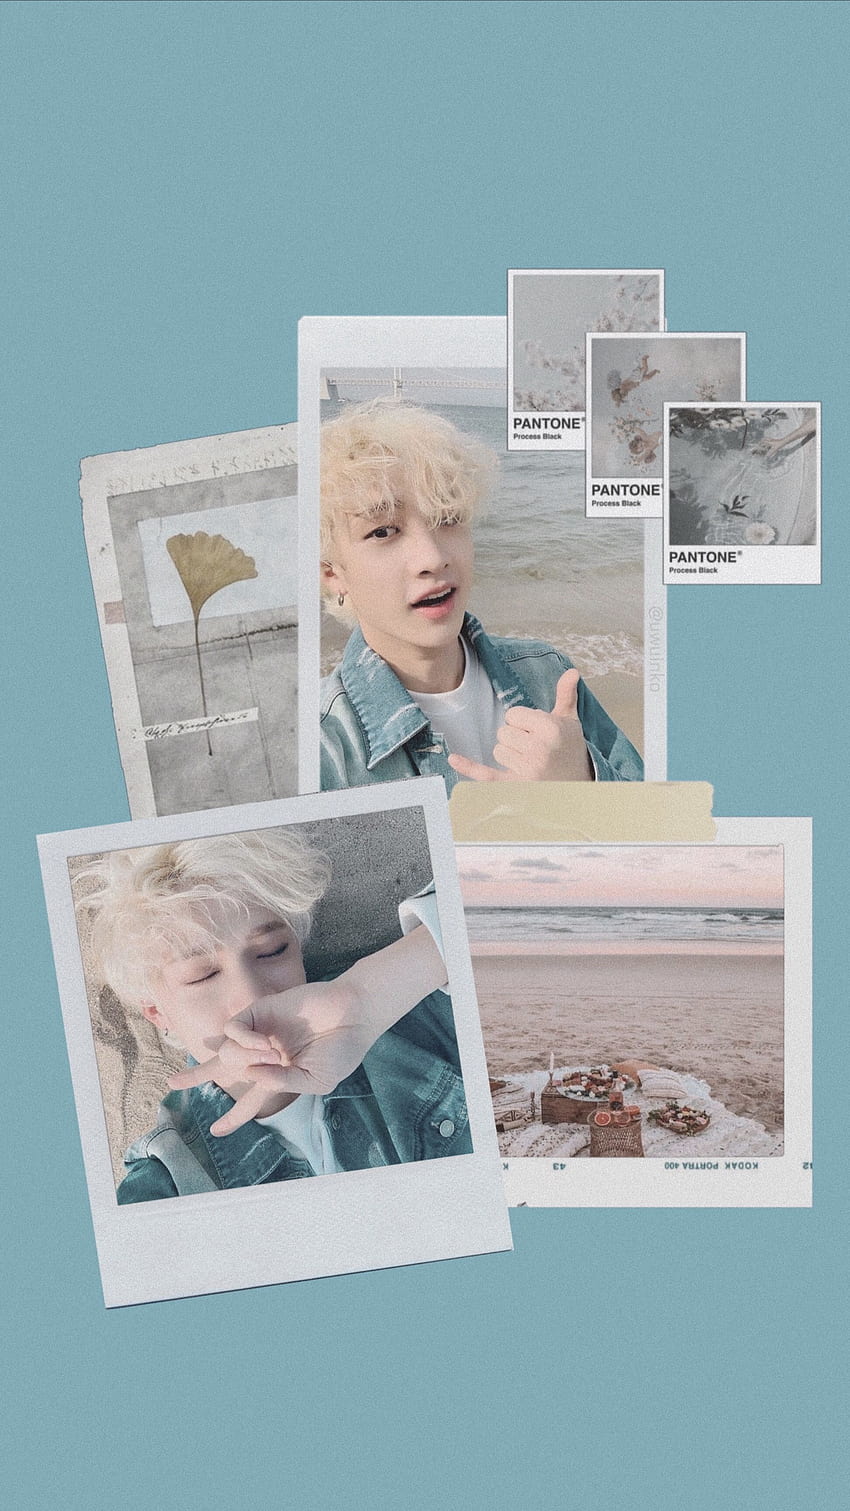 1920x1080px, 1080P Free download | Bangchan Aesthetic. Cute cat , Stray